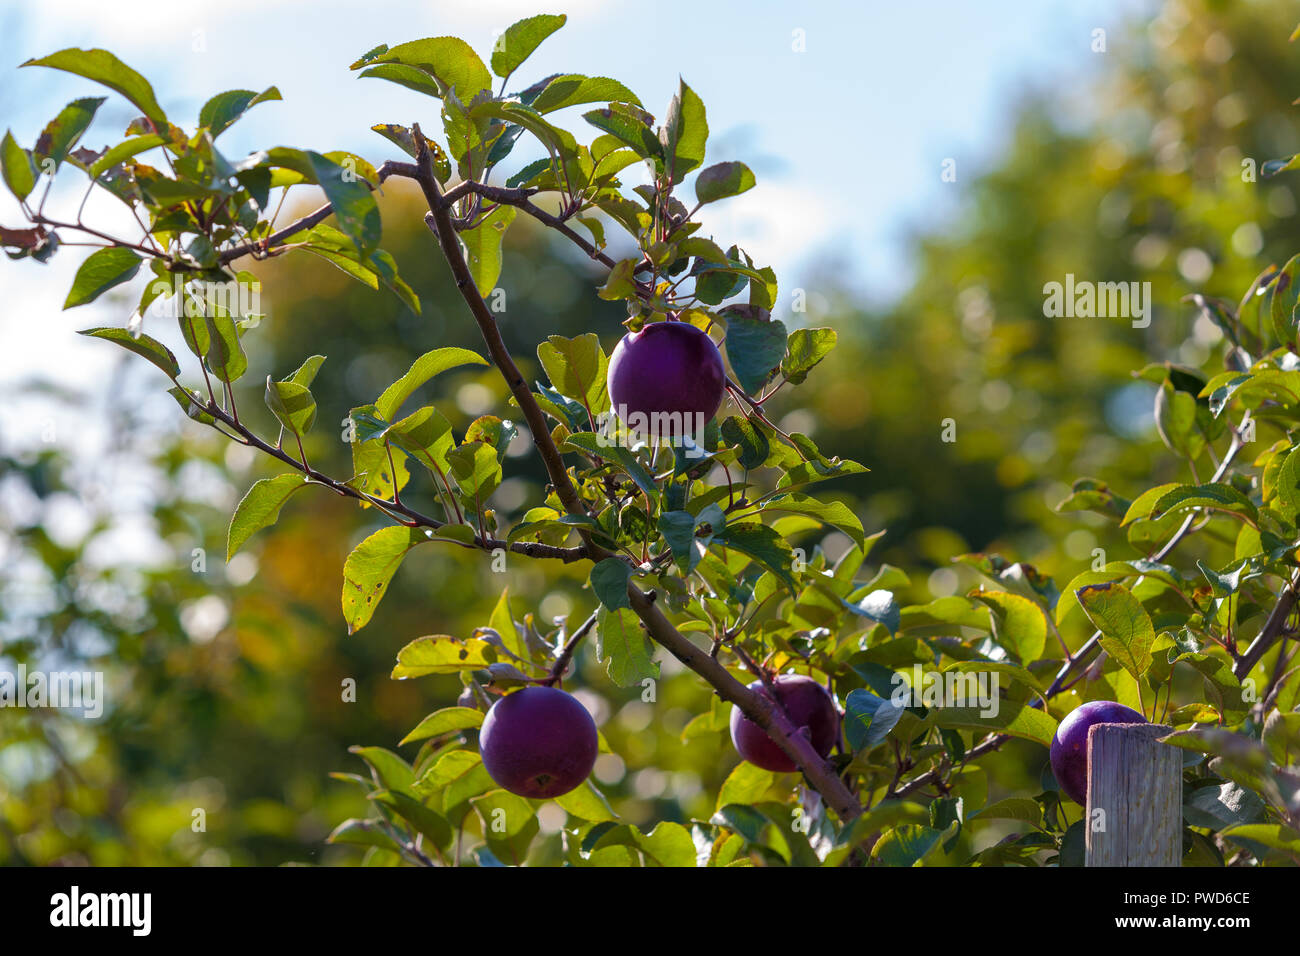 Hamilton, CANADA - October 14, 2018: Ripe  apples on trees in orchard ready for picking at farmer market in autumn Stock Photo